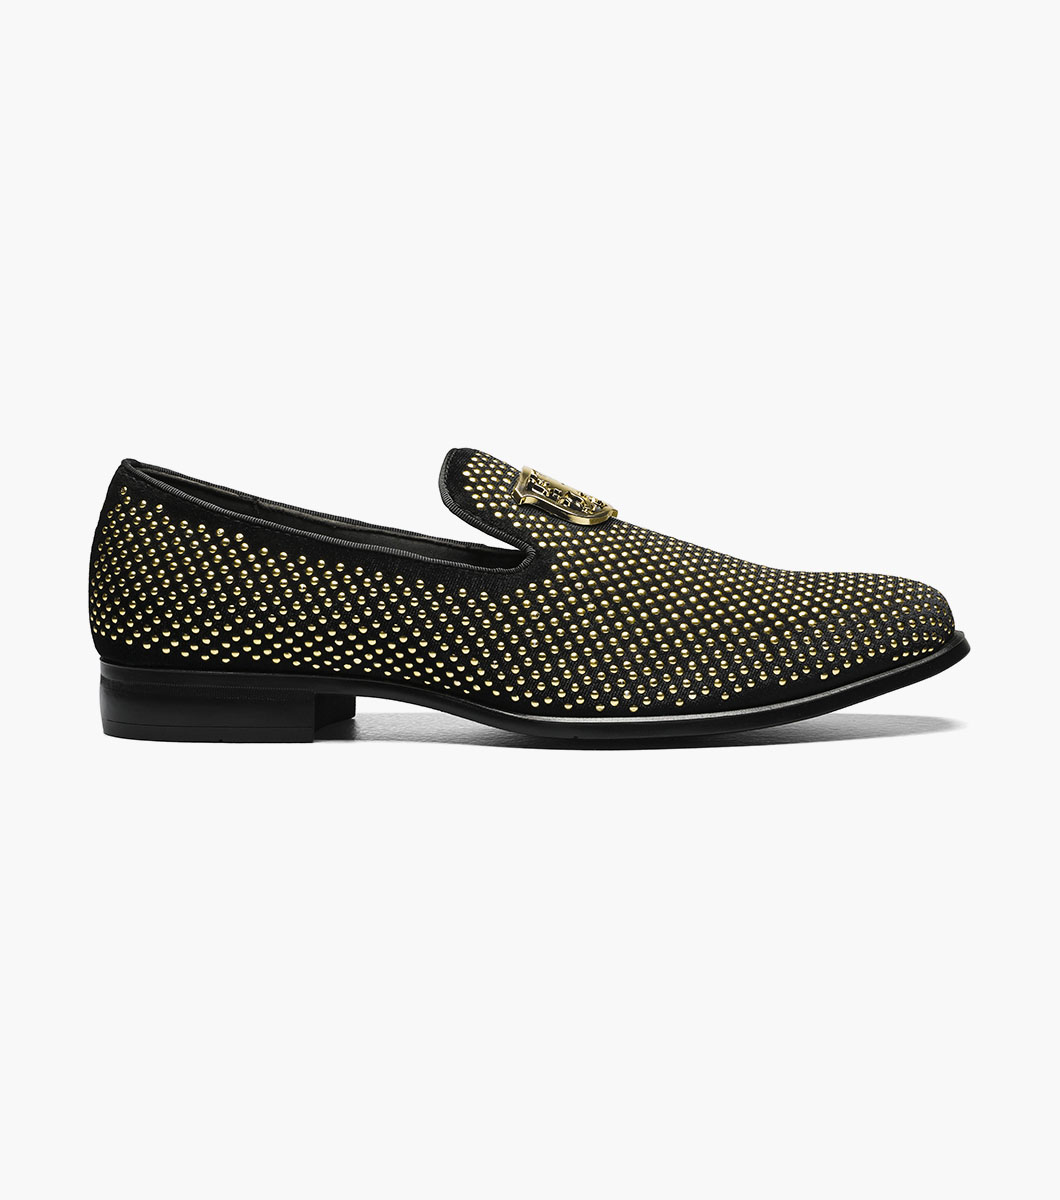 Swagger Studded Slip On Men’s Dress Shoes | Stacyadams.com